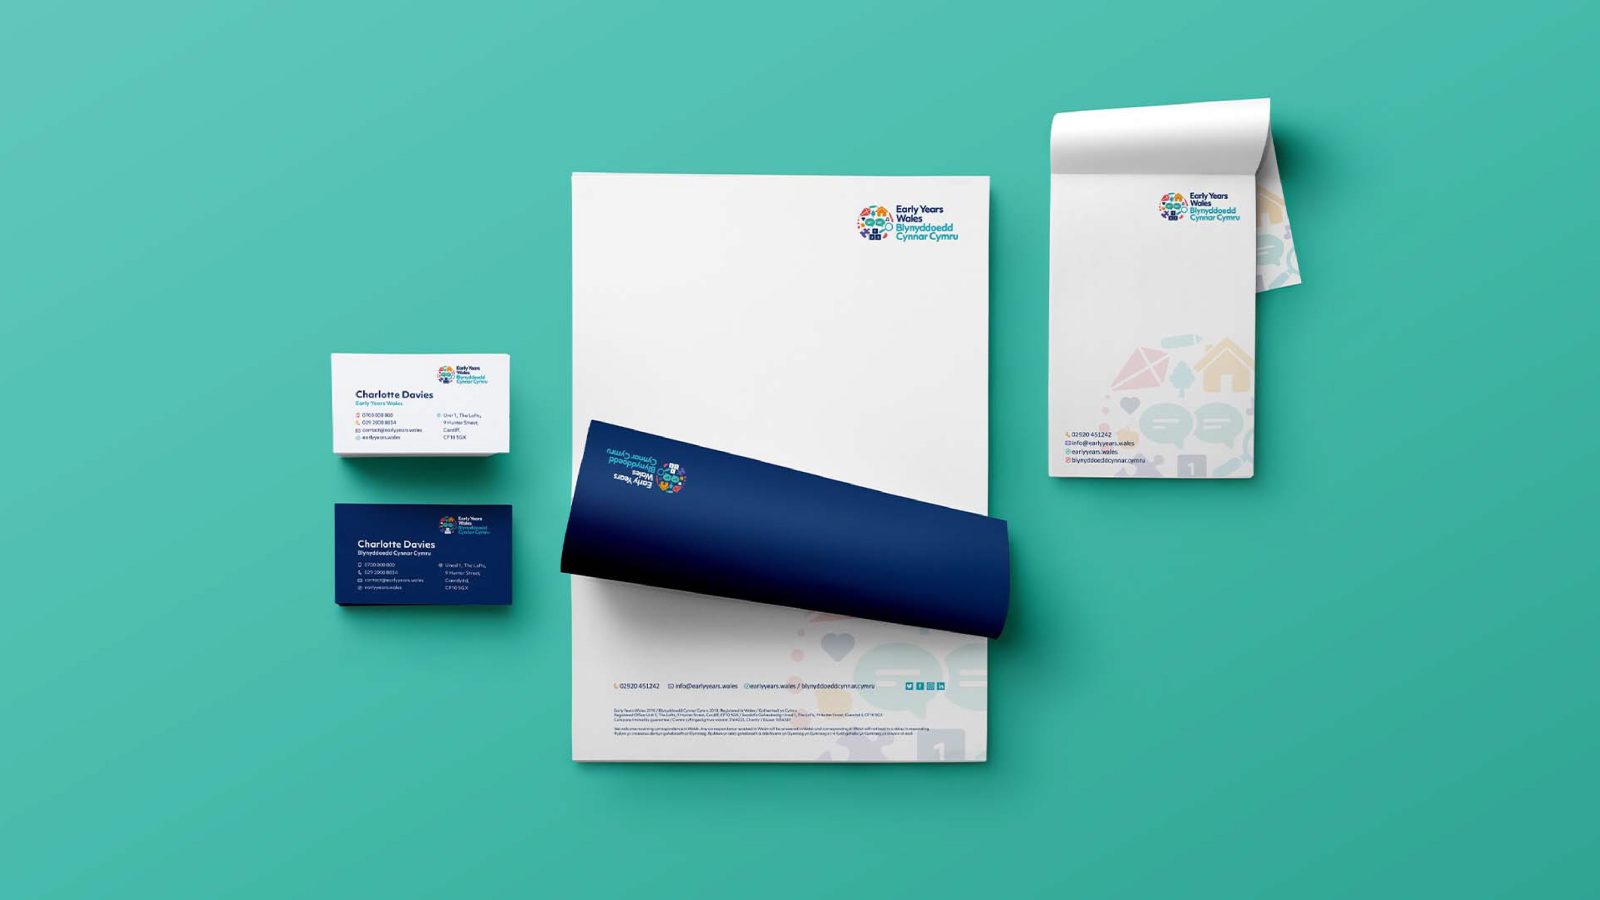 Corporate branding materials designed by a prominent Design Agency UK, including a business card, letterhead, and envelope displayed on a teal background, all featuring a logo with colorful iconography.